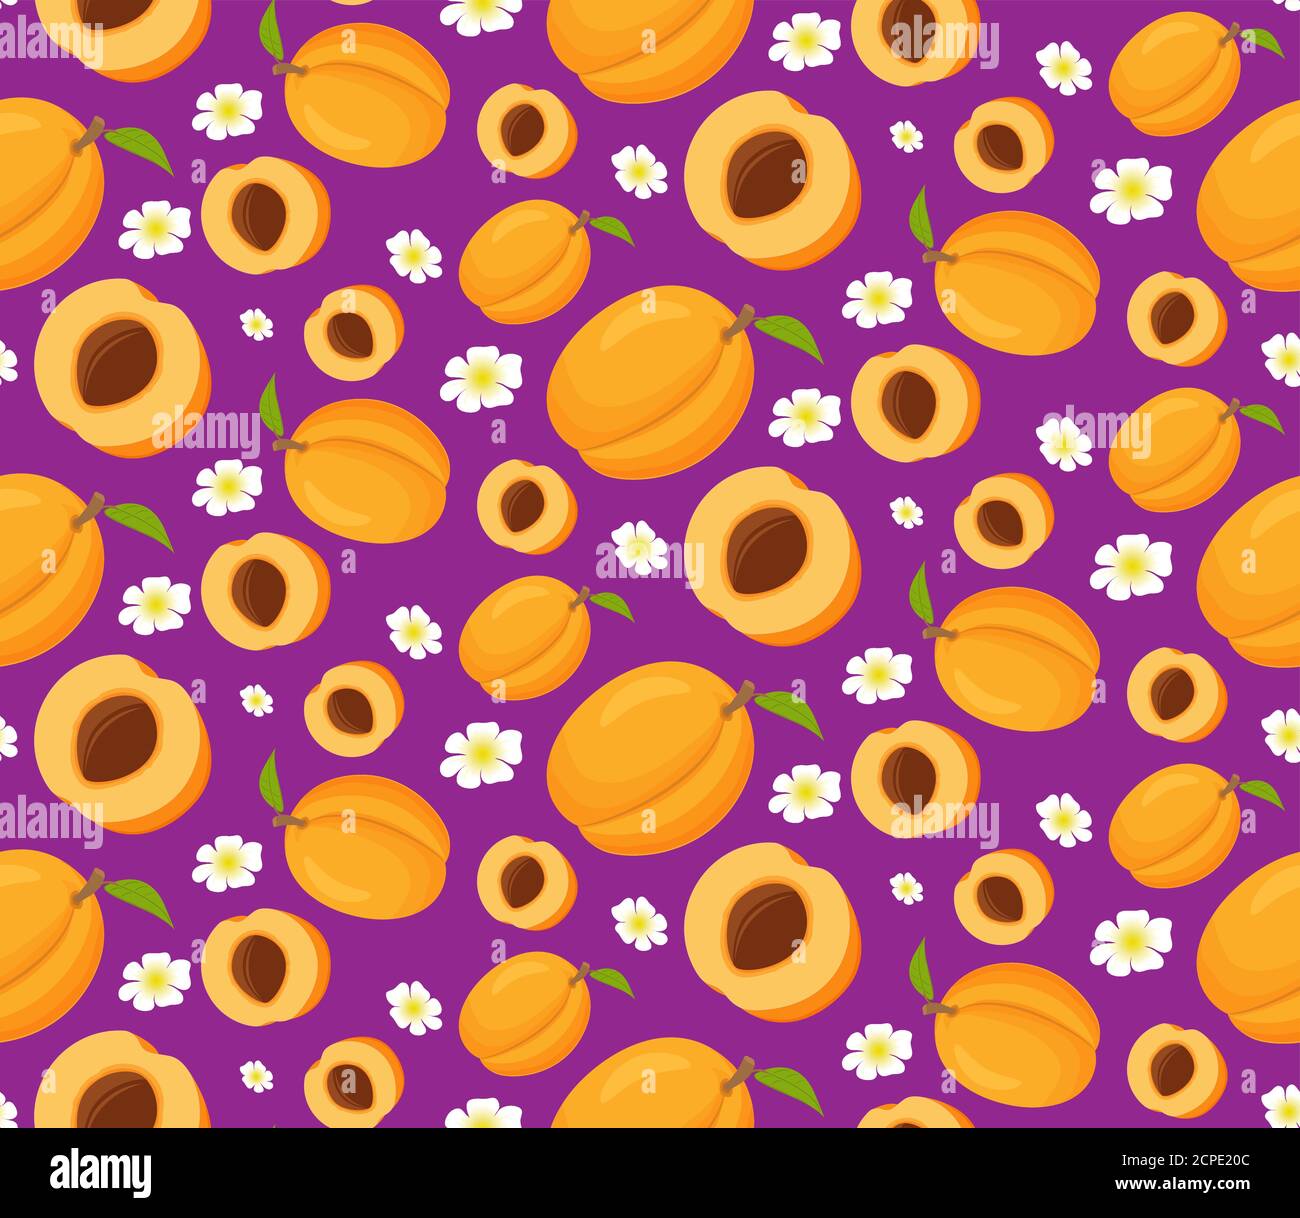 Seamless pattern with apricots. Ripe fruit apricot. Concept of design of ornaments for fabric, paper. Stock Vector